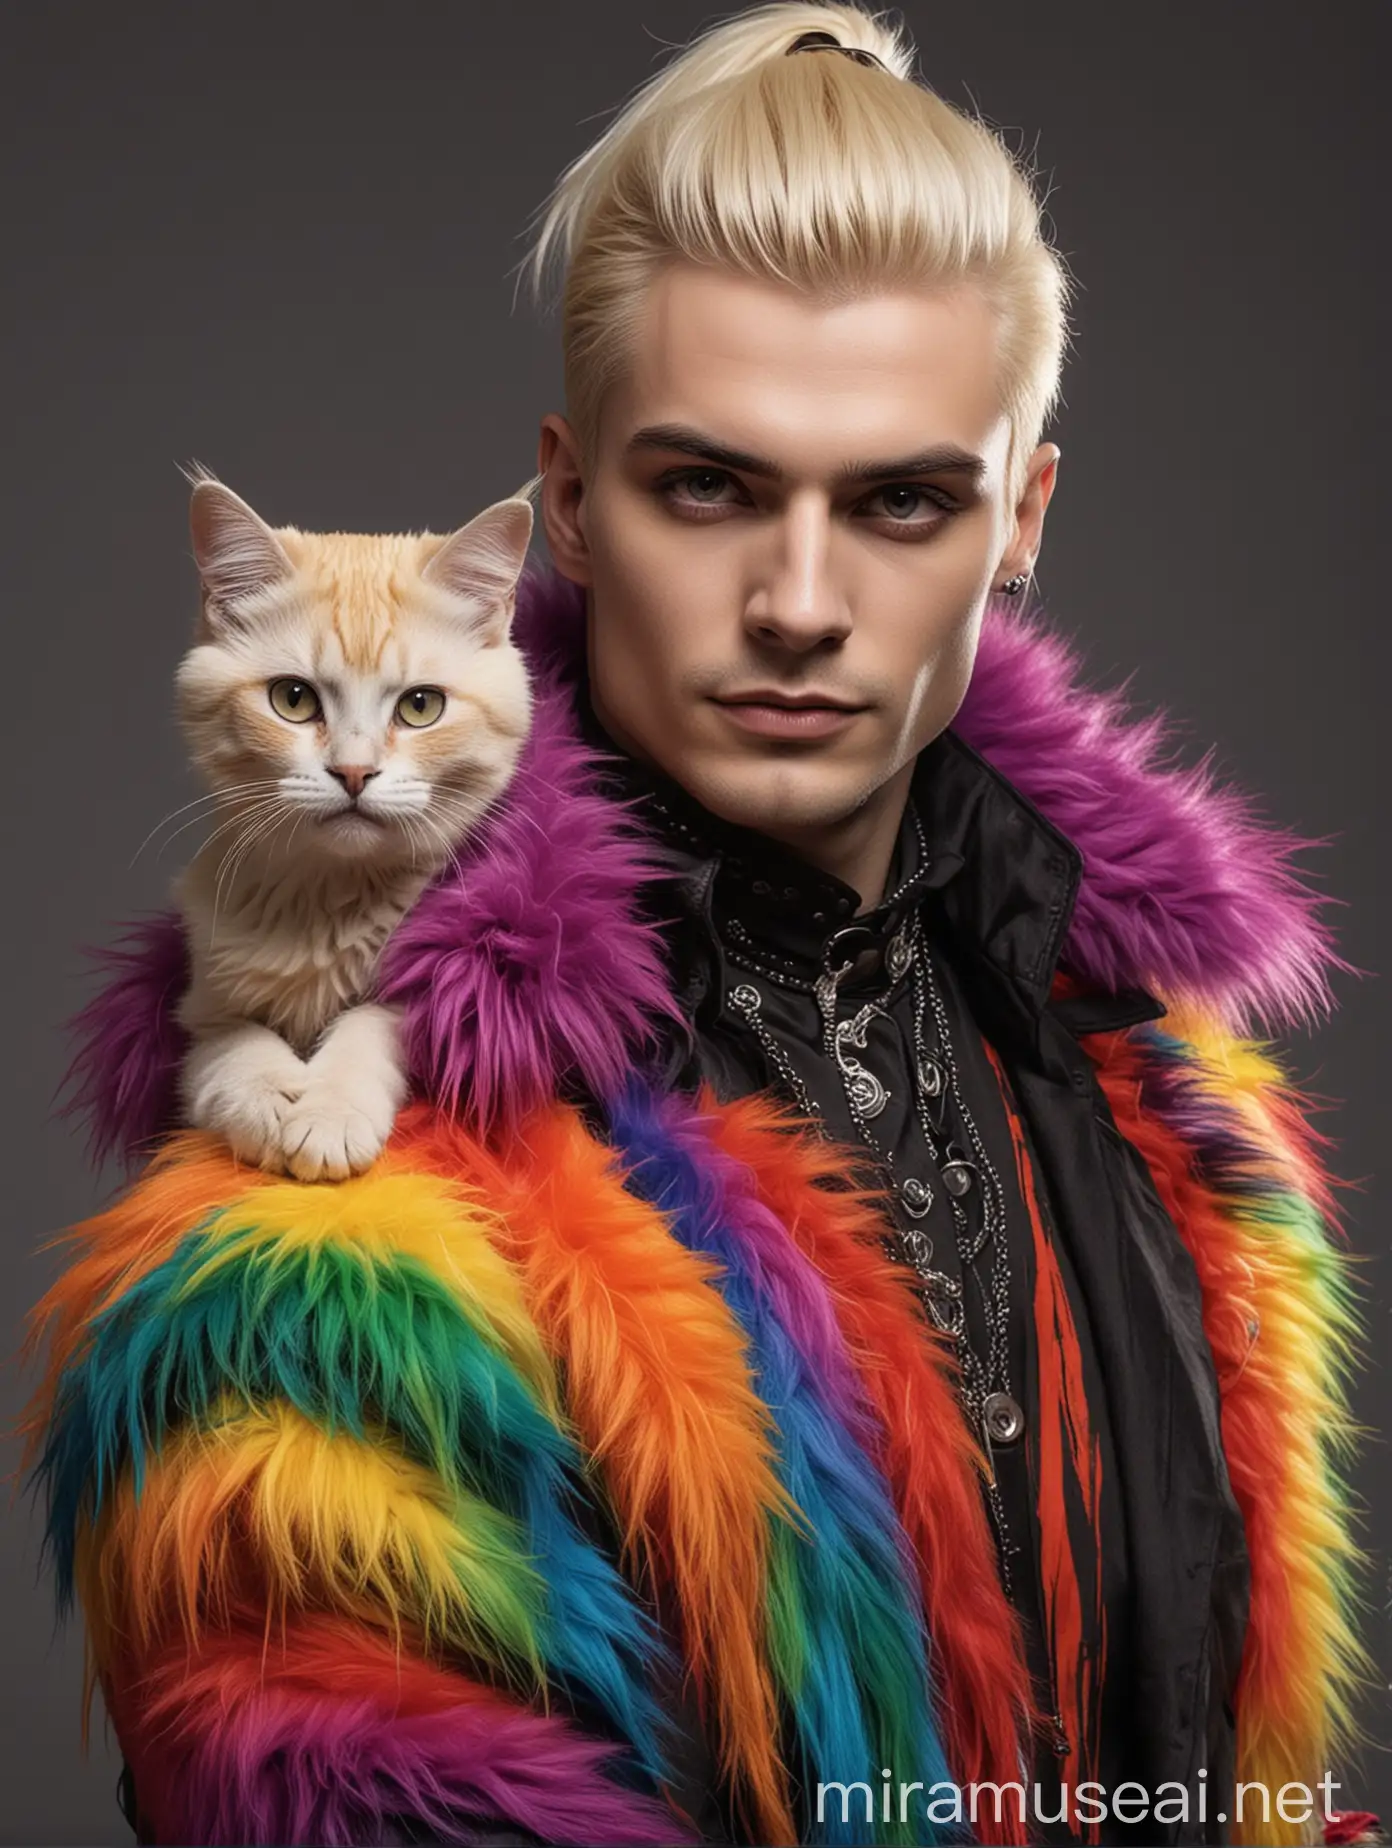 Gothic Man with Blond Hair in Rainbow Fur Outfit and Pet Cat